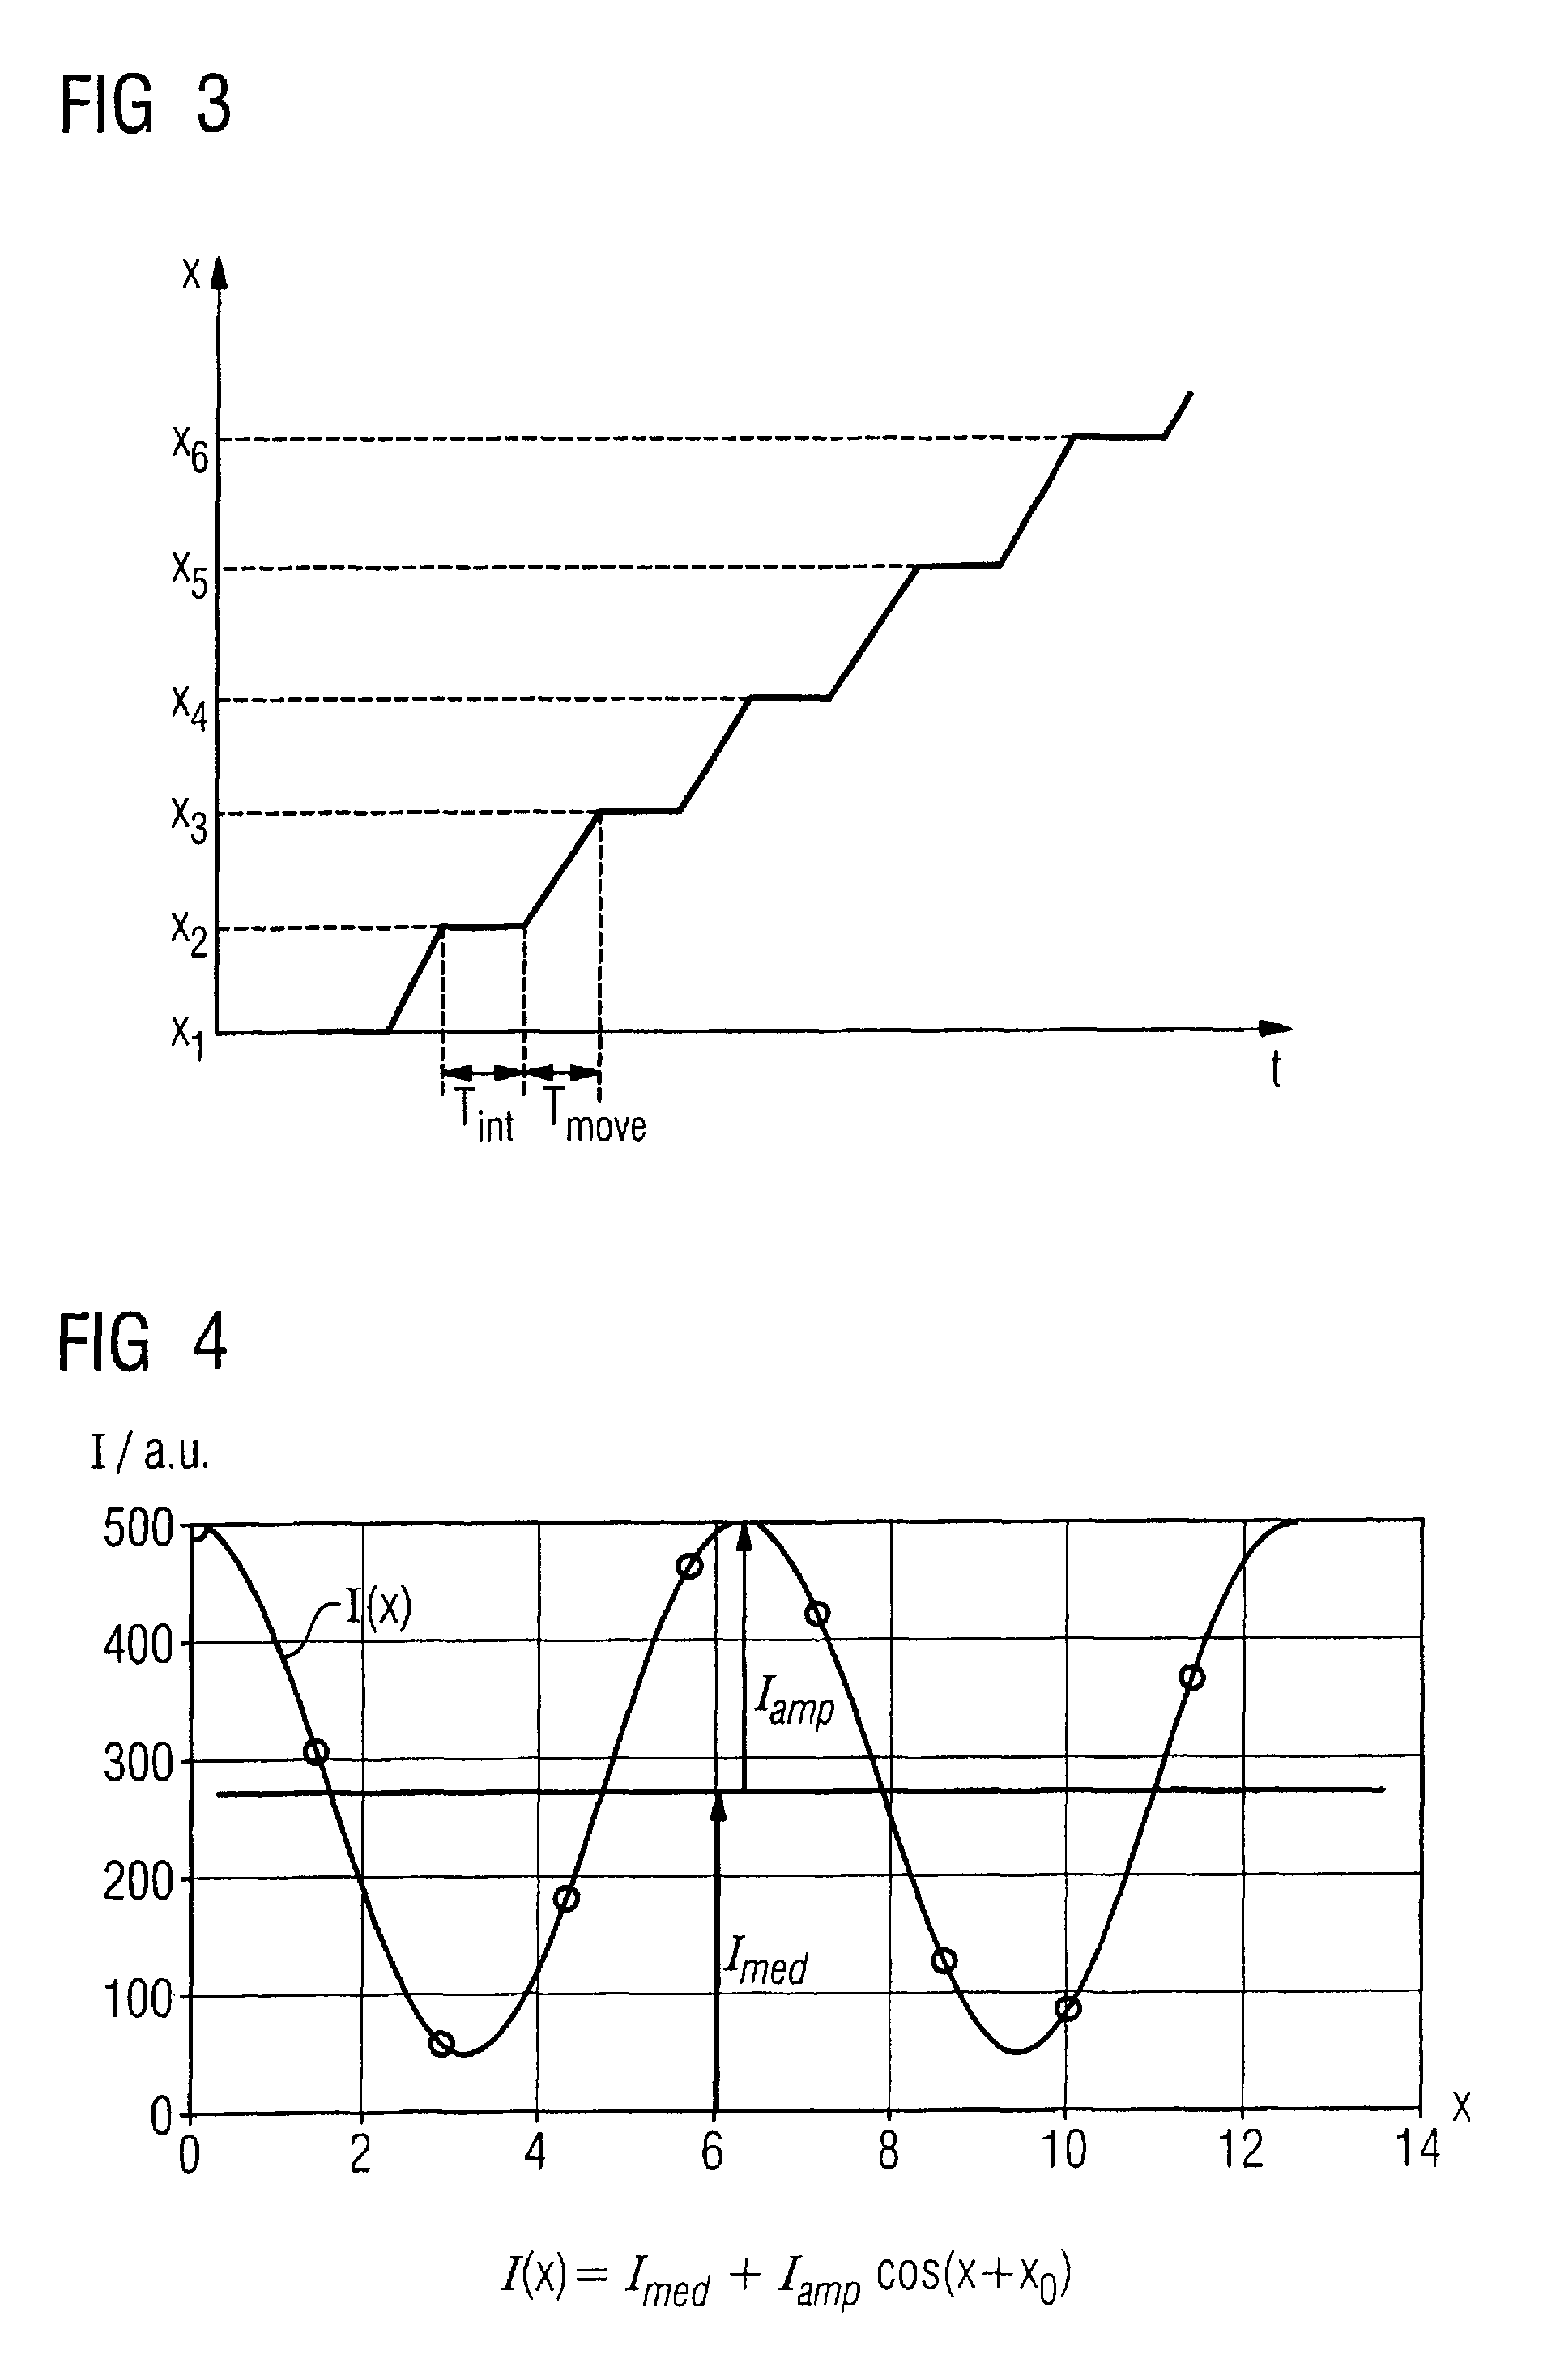 Method to determine phase and/or amplitude between interfering, adjacent x-ray beams in a detector pixel in a talbot interferometer